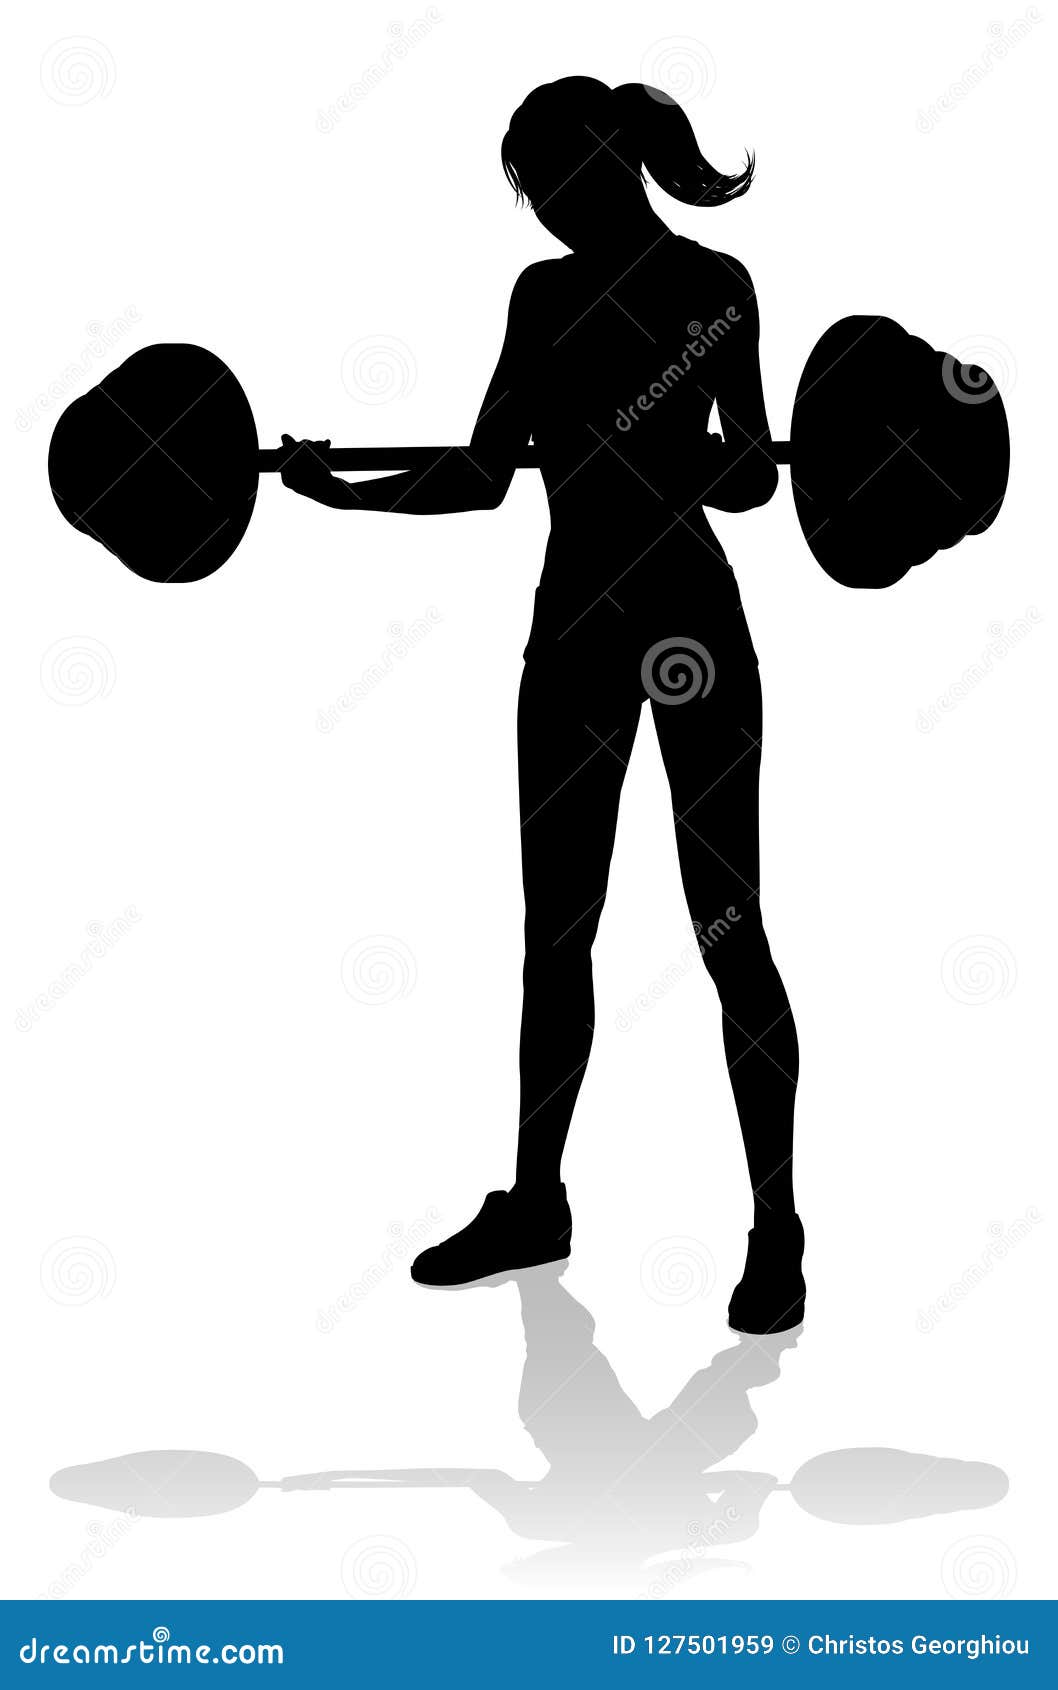 Gym Woman Silhouette Barbell Weights Stock Vector - Illustration of beautif...